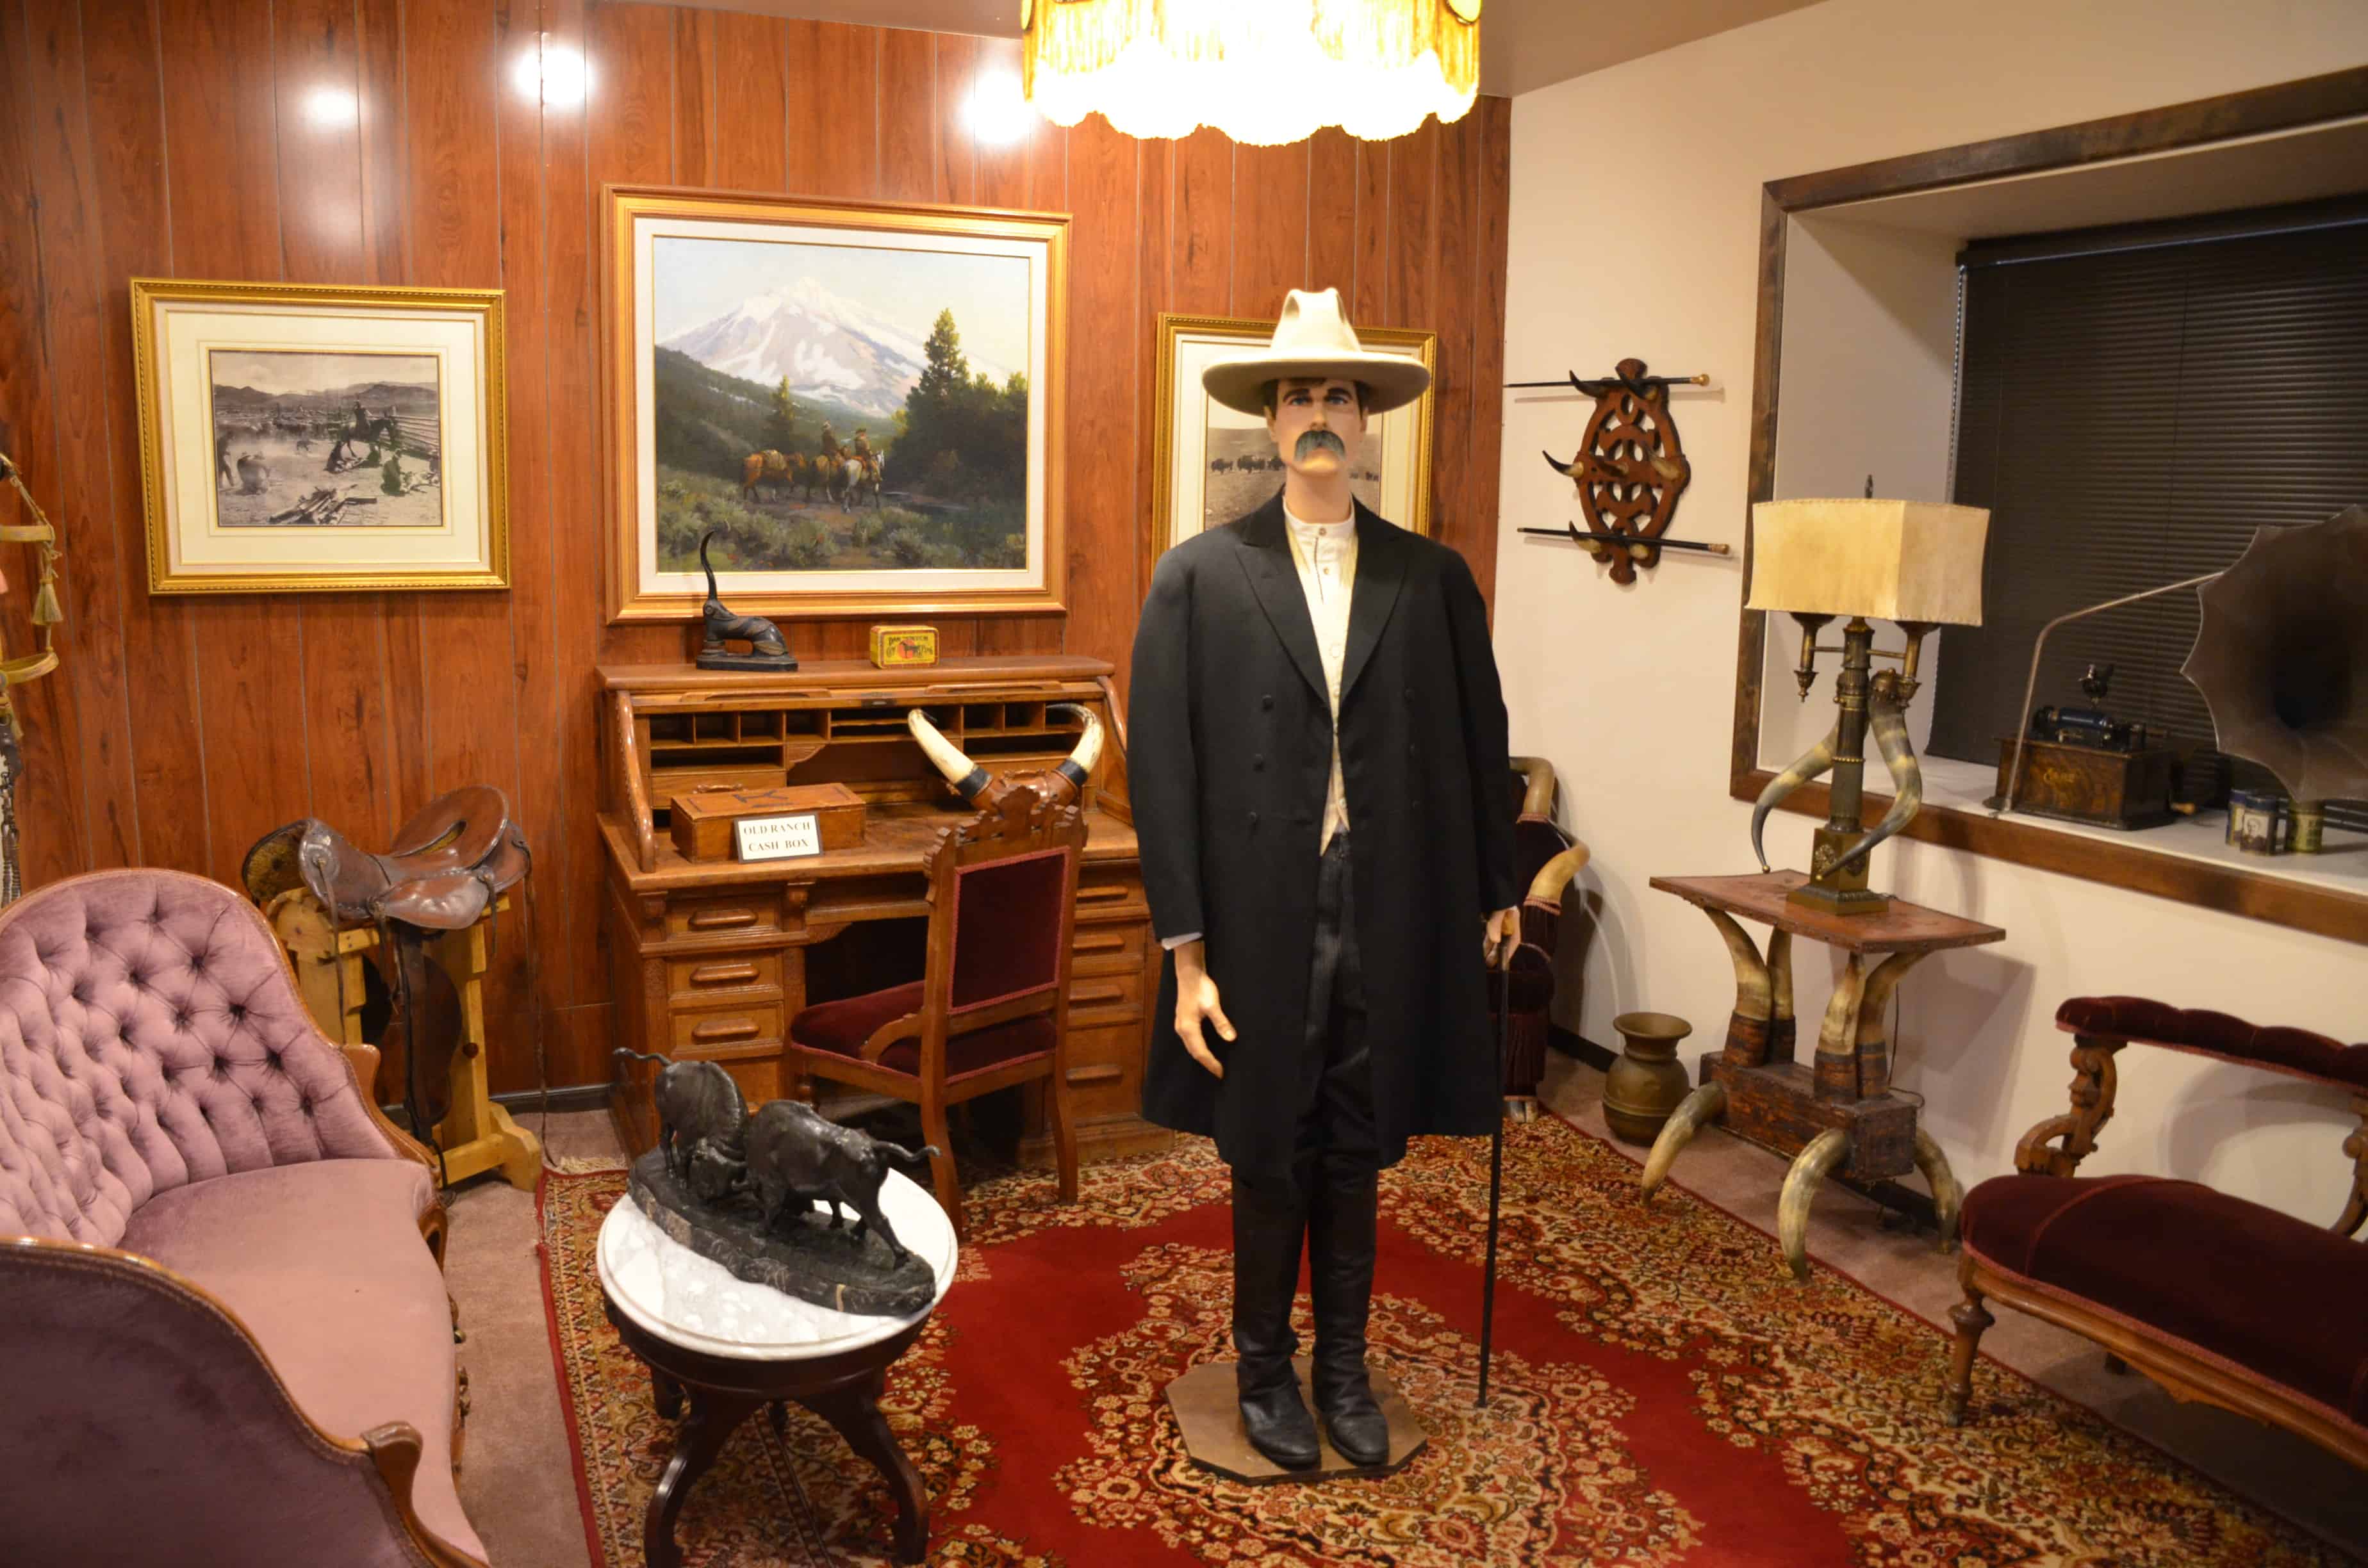 Cattle baron's room at the Nelson Museum of the West in Cheyenne, Wyoming